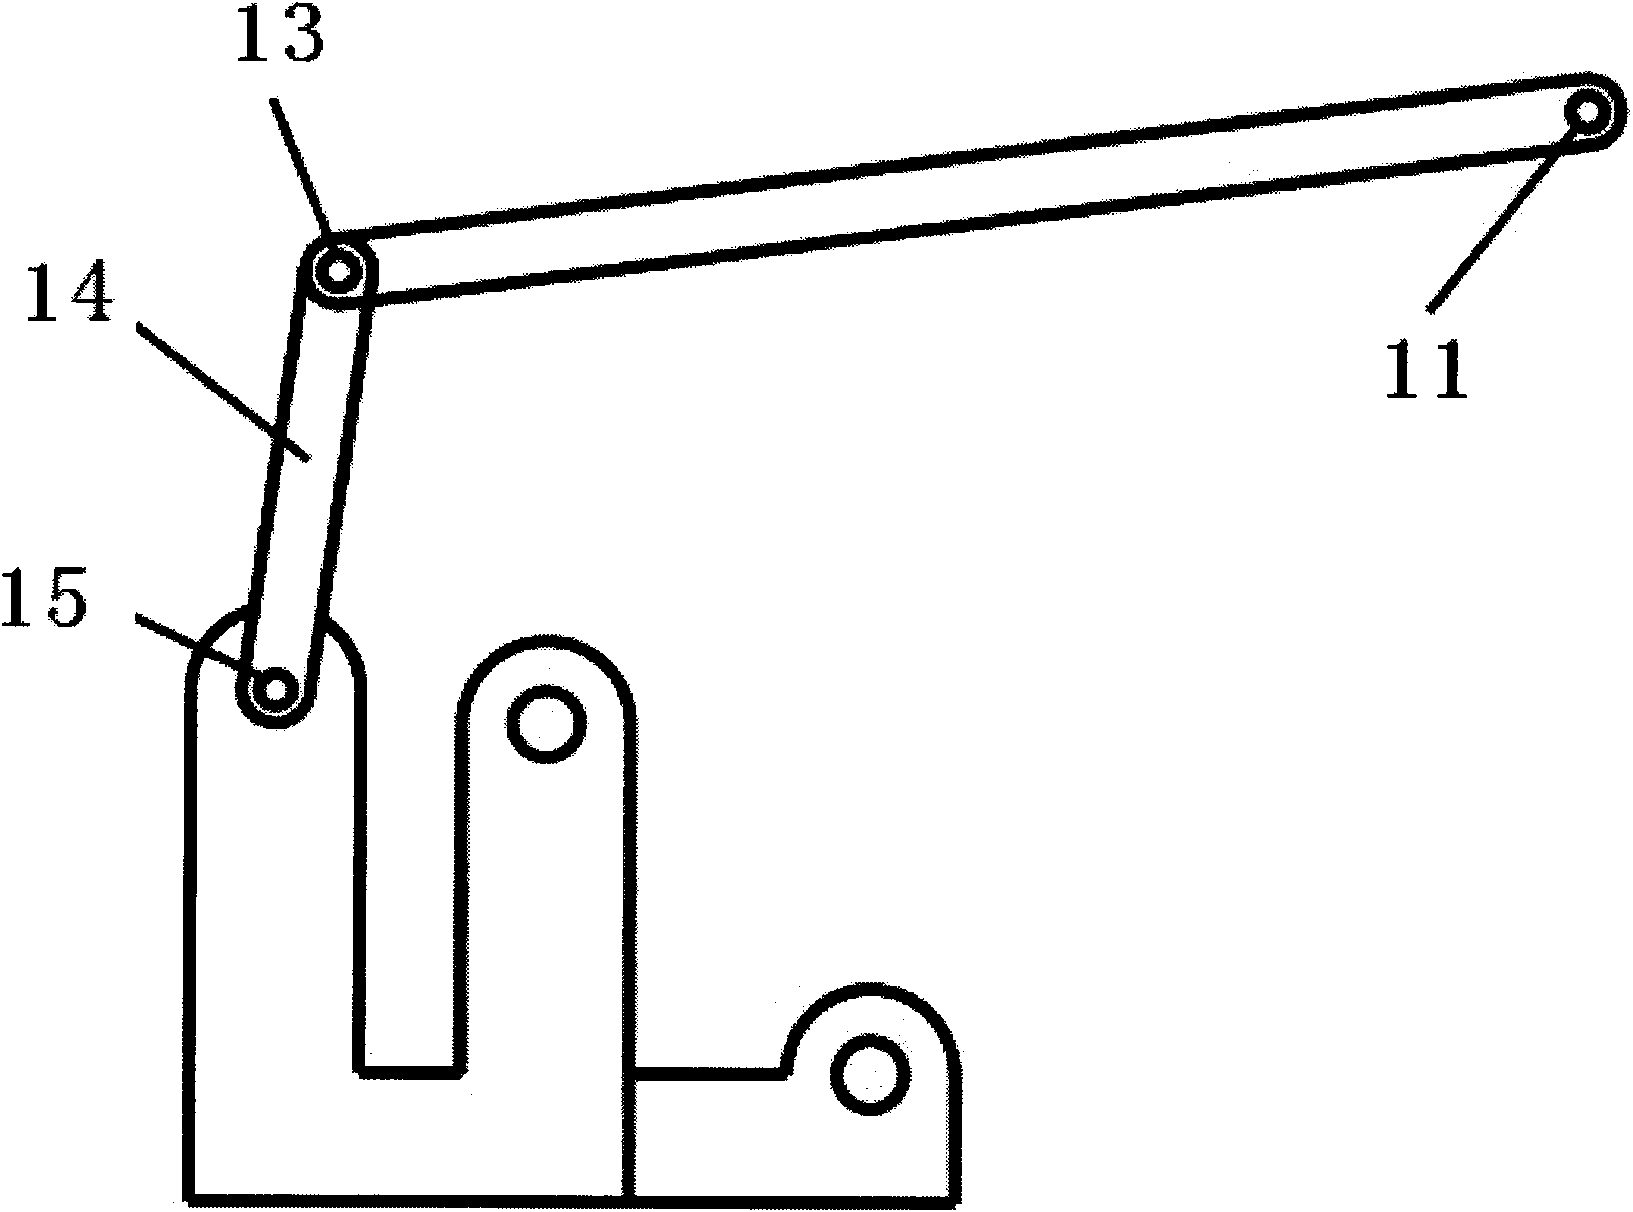 High-rigidity nine-lever and two-freedom degree controllable mechanical loading mechanism